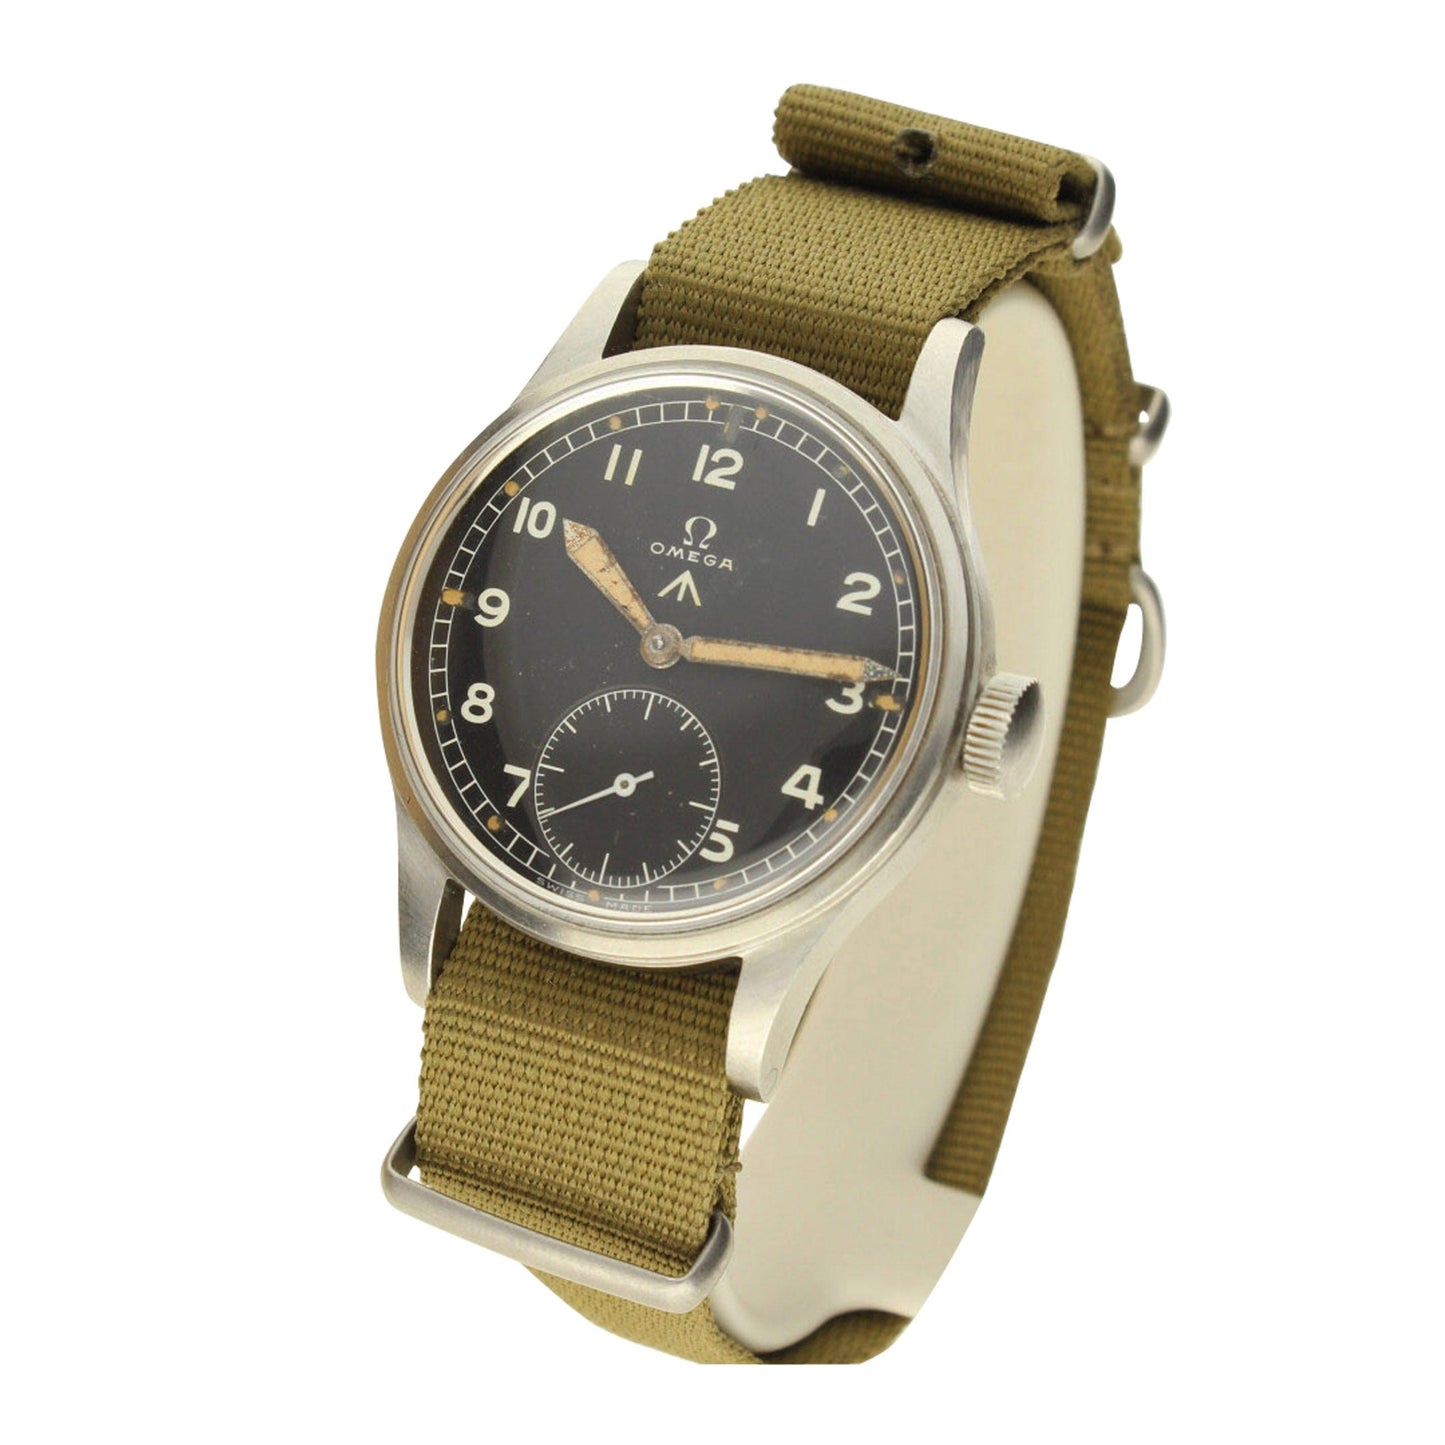 Stainless steel British military watch, part of the "Dirty dozen". Made 1949